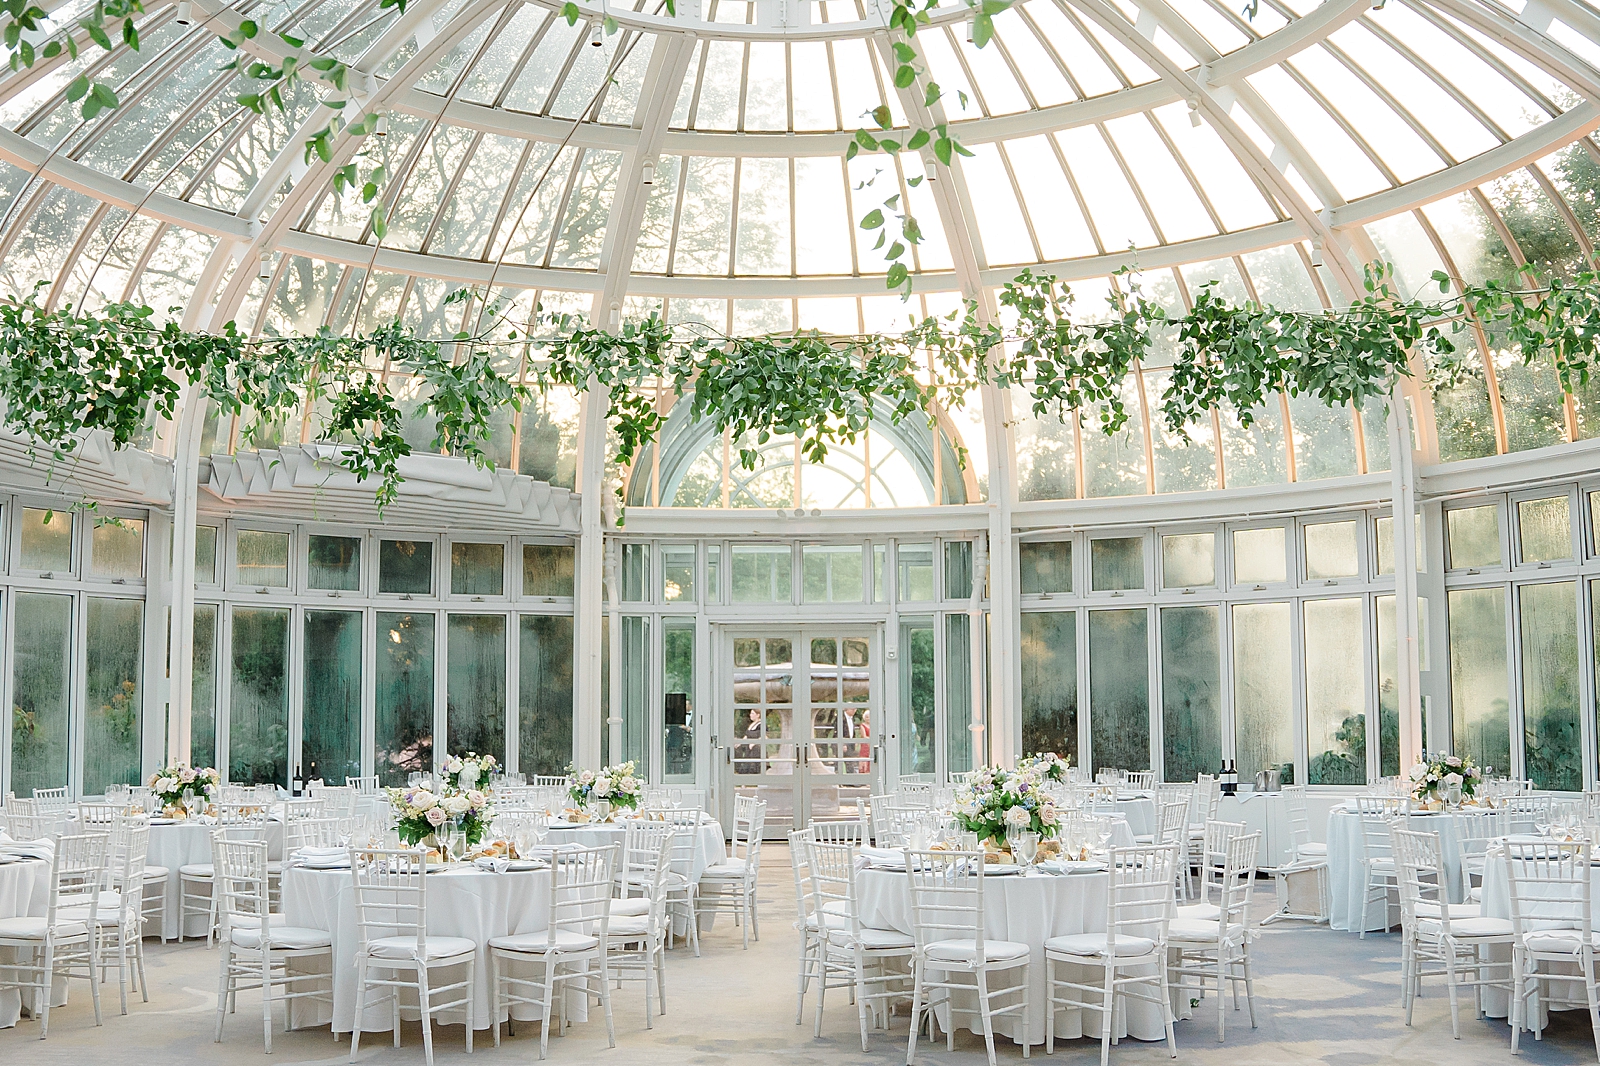 Horizontal shot of the reception space, complete with white table linens, chairs, and greenery draped from the ceiling.